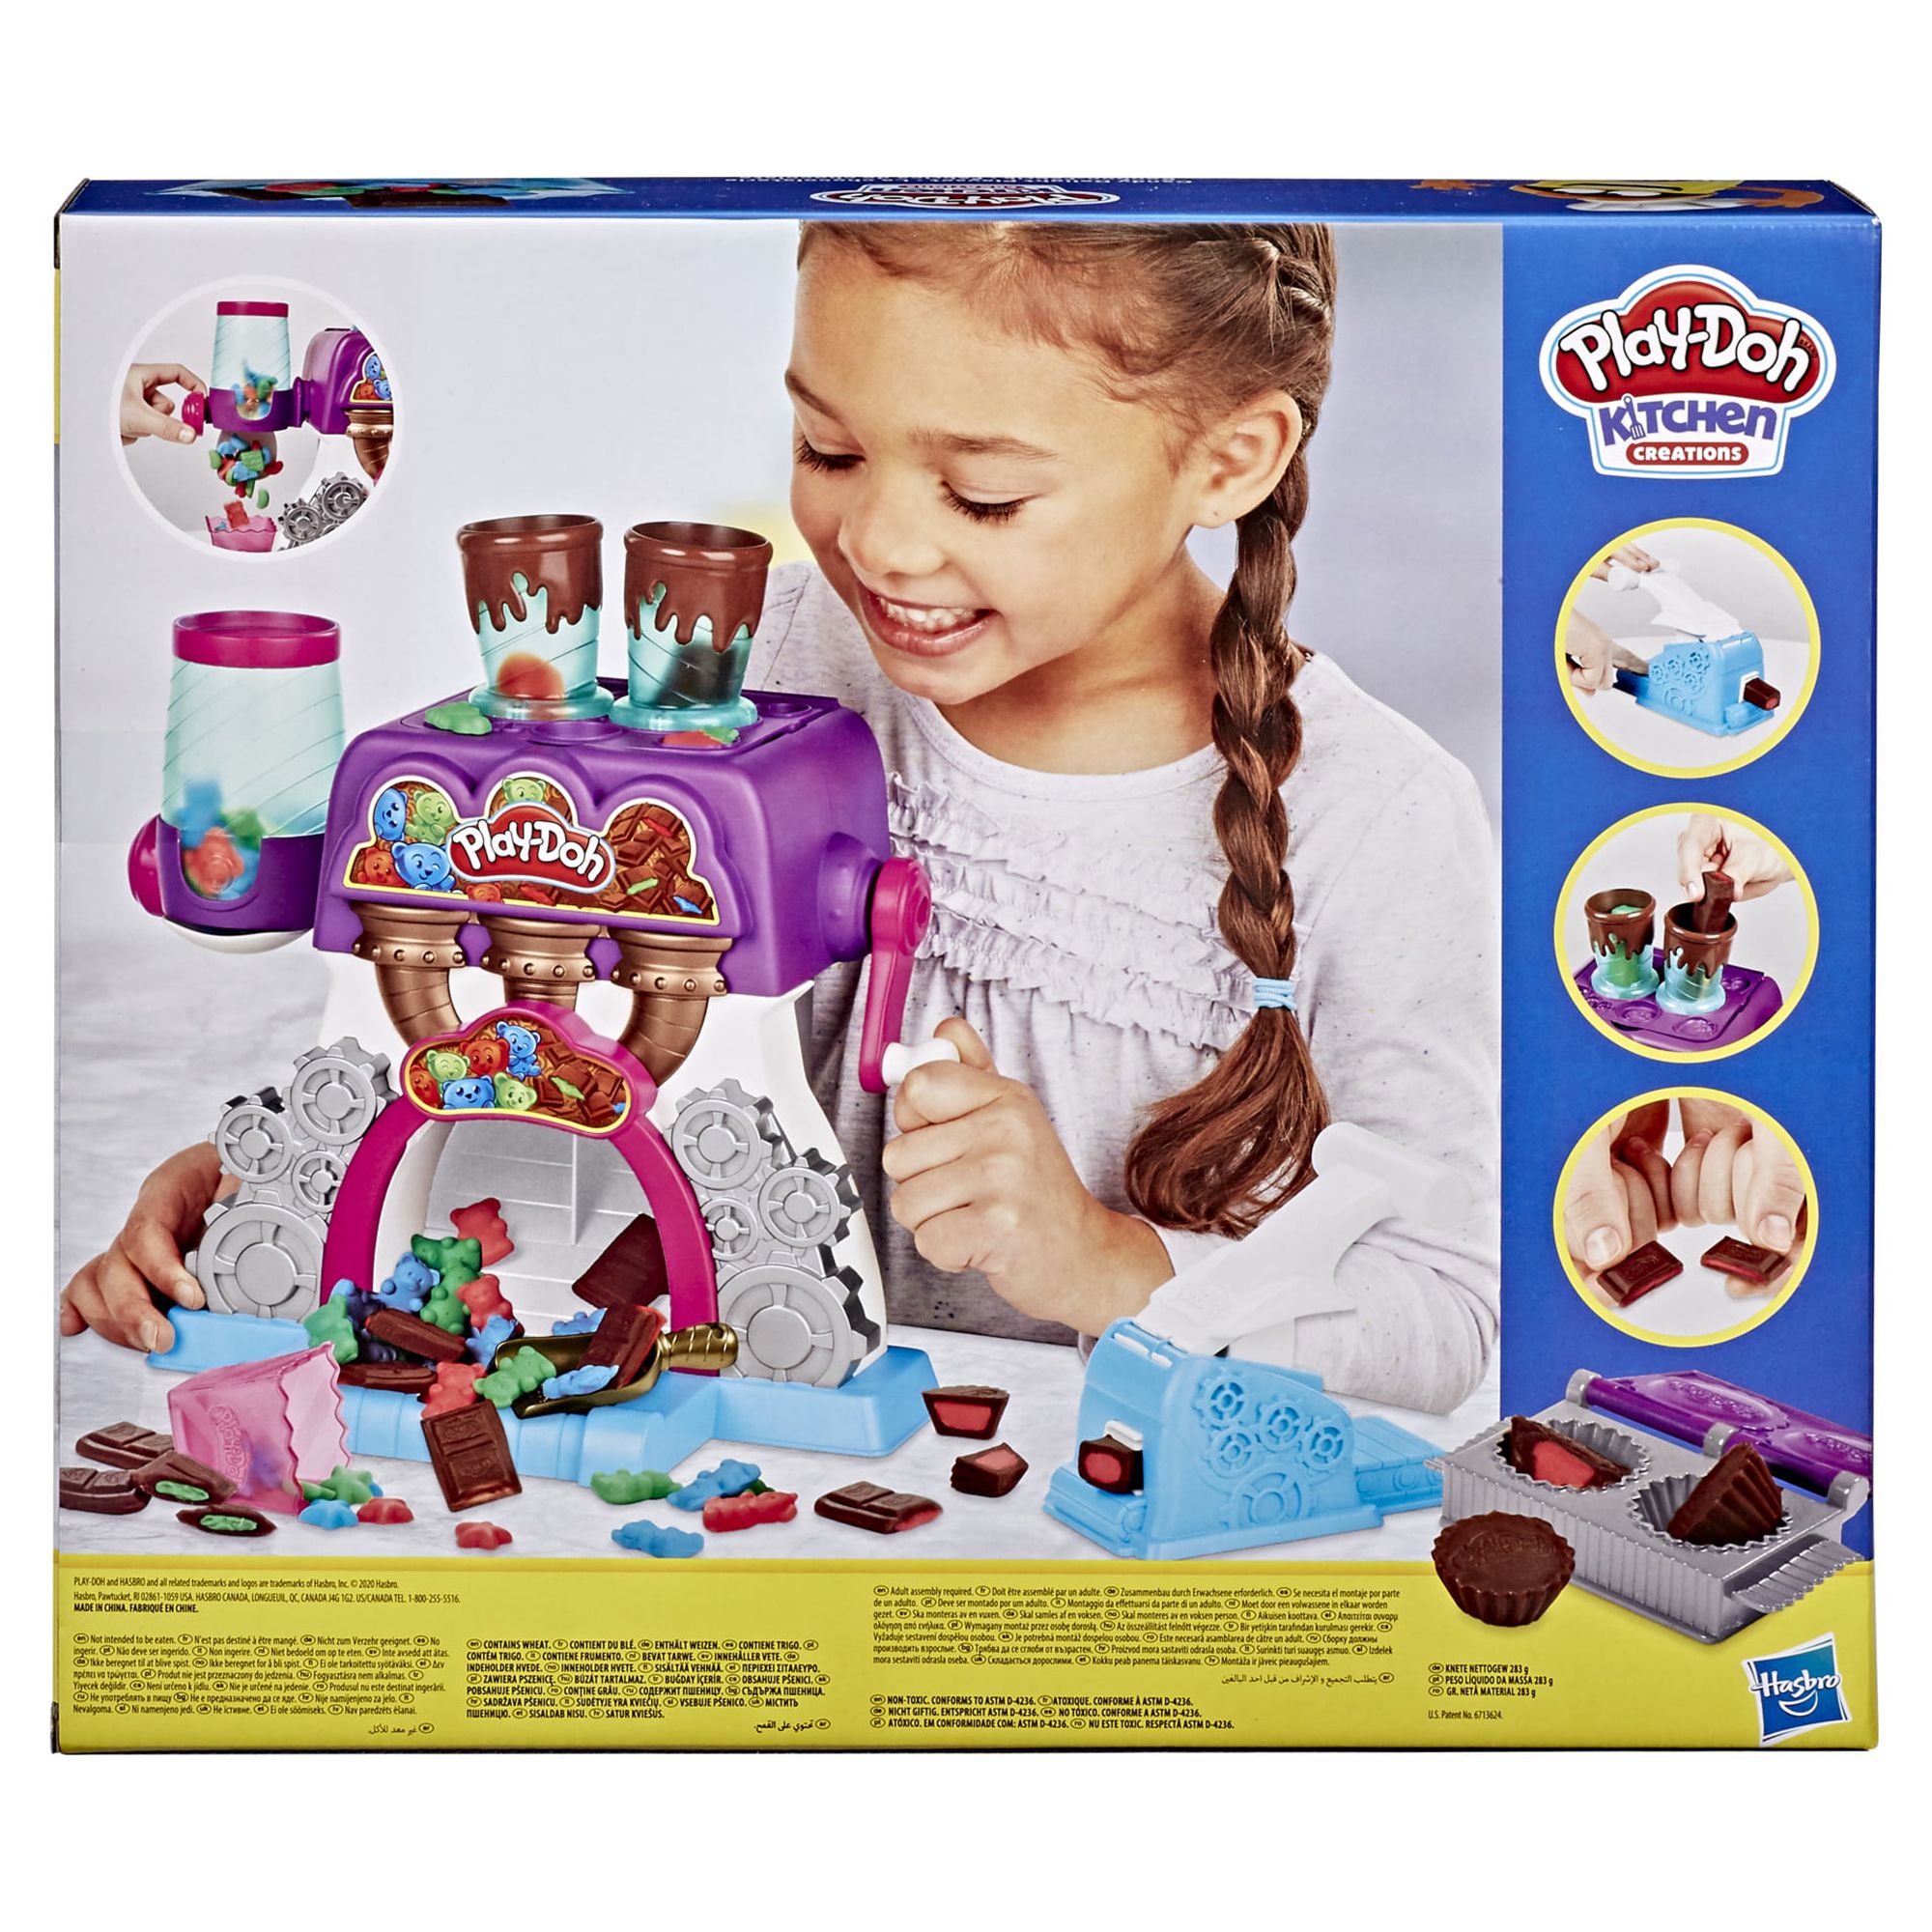 Play-Doh Kitchen Creations Candy Delight Play Dough Set - 5 Color (5 Piece) - image 4 of 11